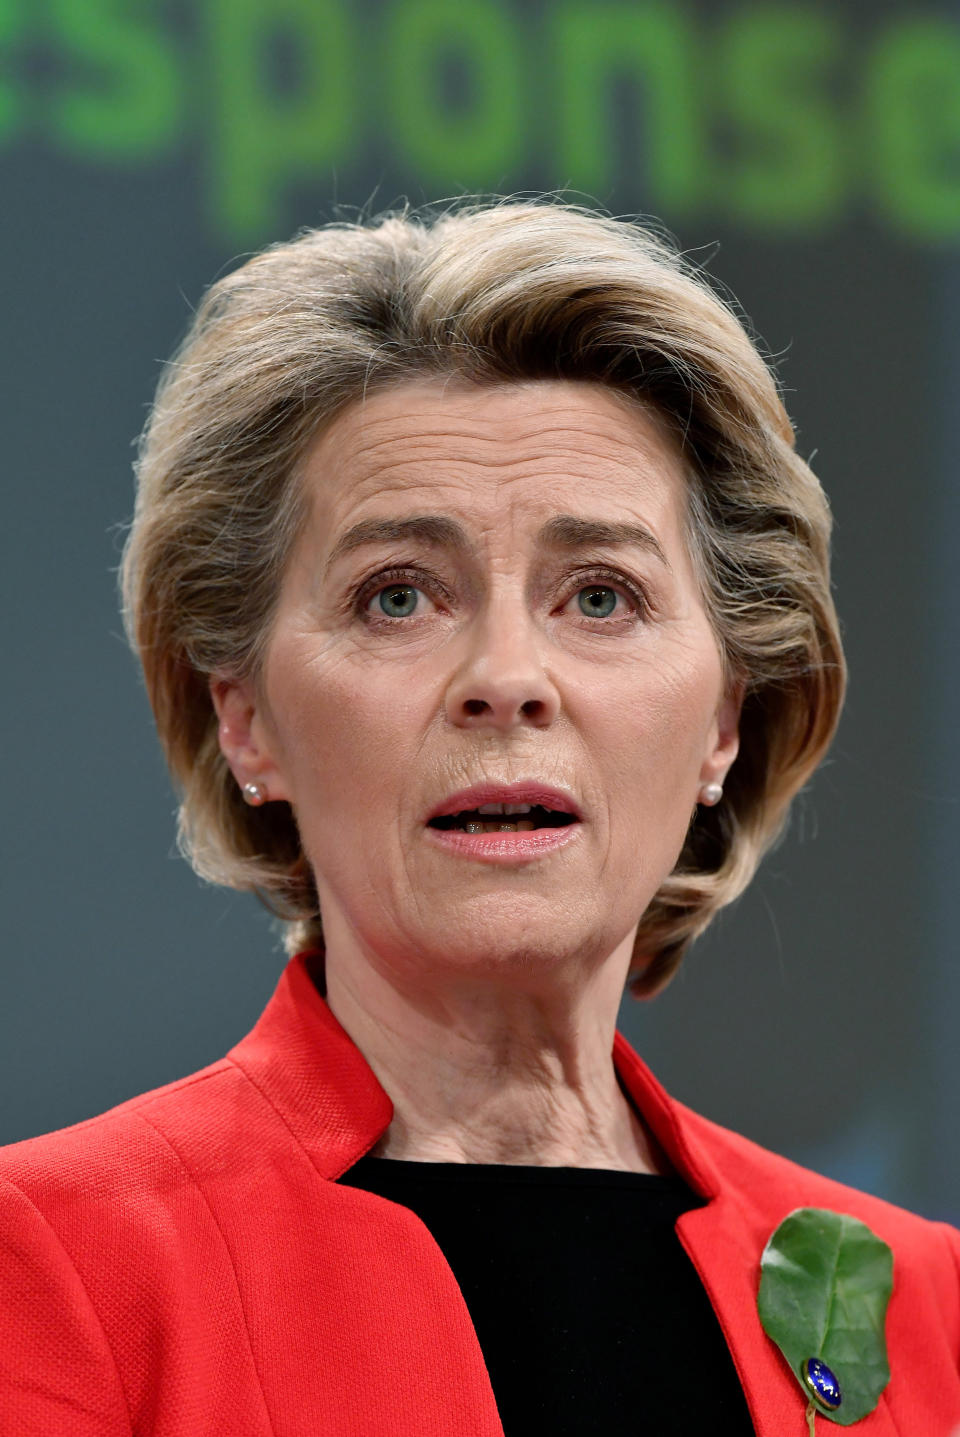 European Commission President Ursula von der Leyen speaks during a media conference on the Commissions response to COVID-19 at EU headquarters in Brussels, Wednesday, March 17, 2021. The European Commission is proposing Wednesday to create a Digital Green Certificate to facilitate safe free movement inside the EU during the COVID-19 pandemic. (John Thys, Pool via AP)